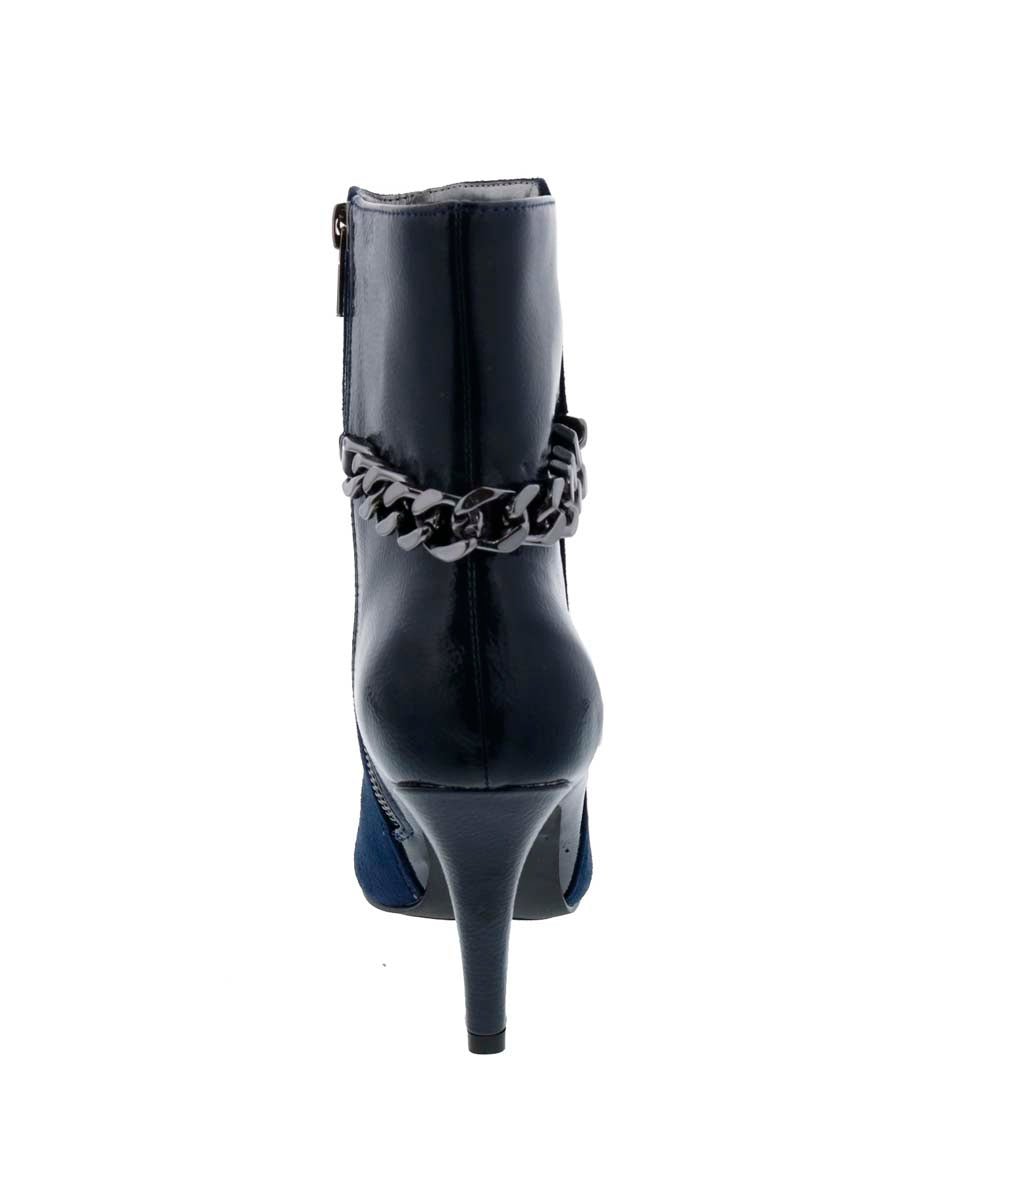 BELLINI CHAIN WOMEN BOOTIES IN BLACK MICRO/PATENT - TLW Shoes